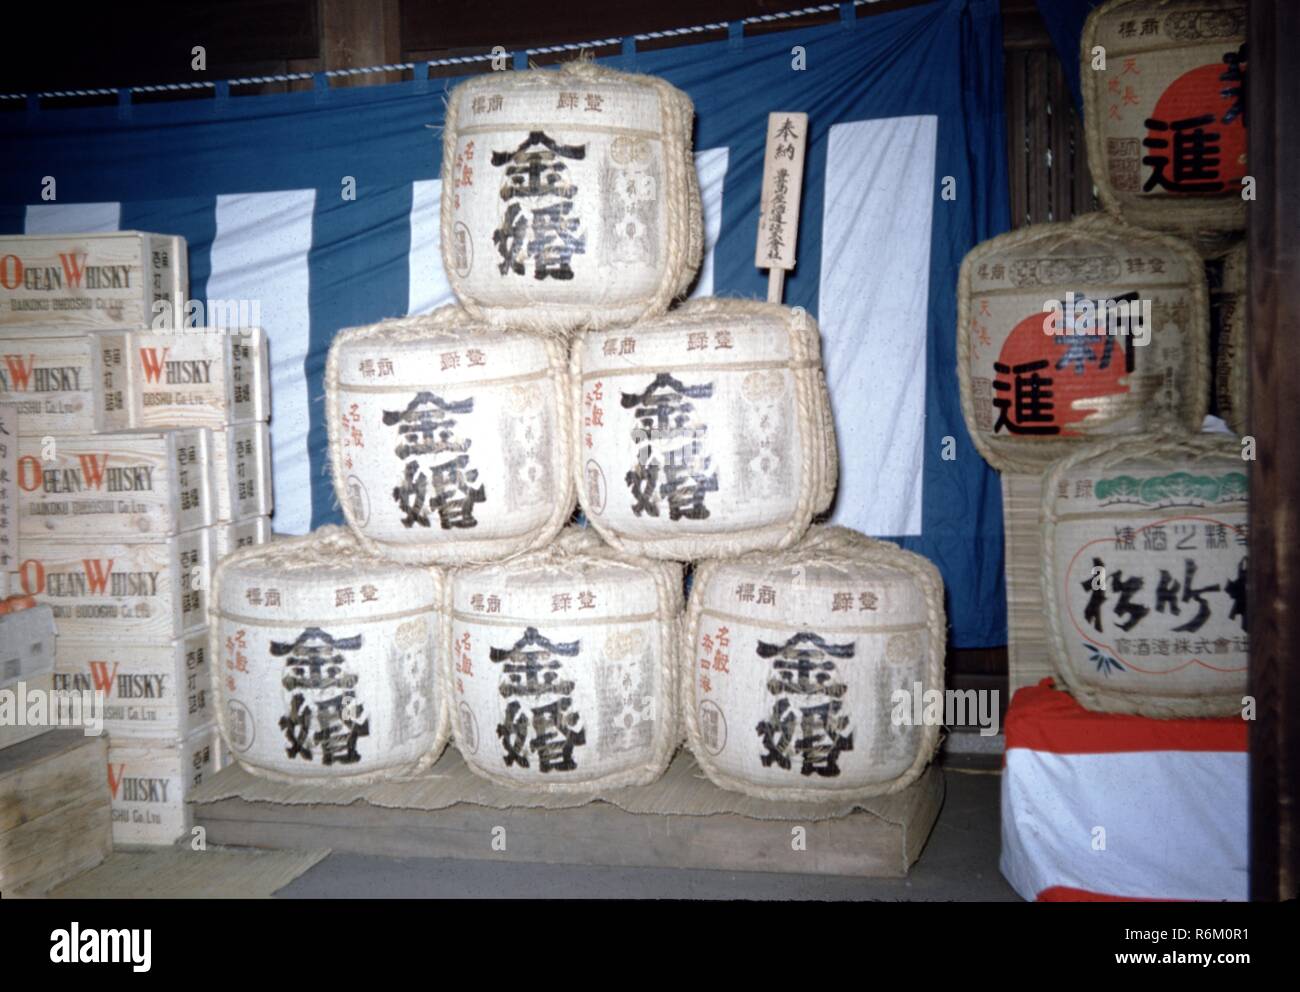 Download Color Photograph Of Liquor Containers Including Wooden Crates Marked Ocean Whiskey Left And Cylindrical Sake Or Japanese Rice Wine Containers With Japanese Text Center And Right Located In Japan 1965 Stock Photo Yellowimages Mockups